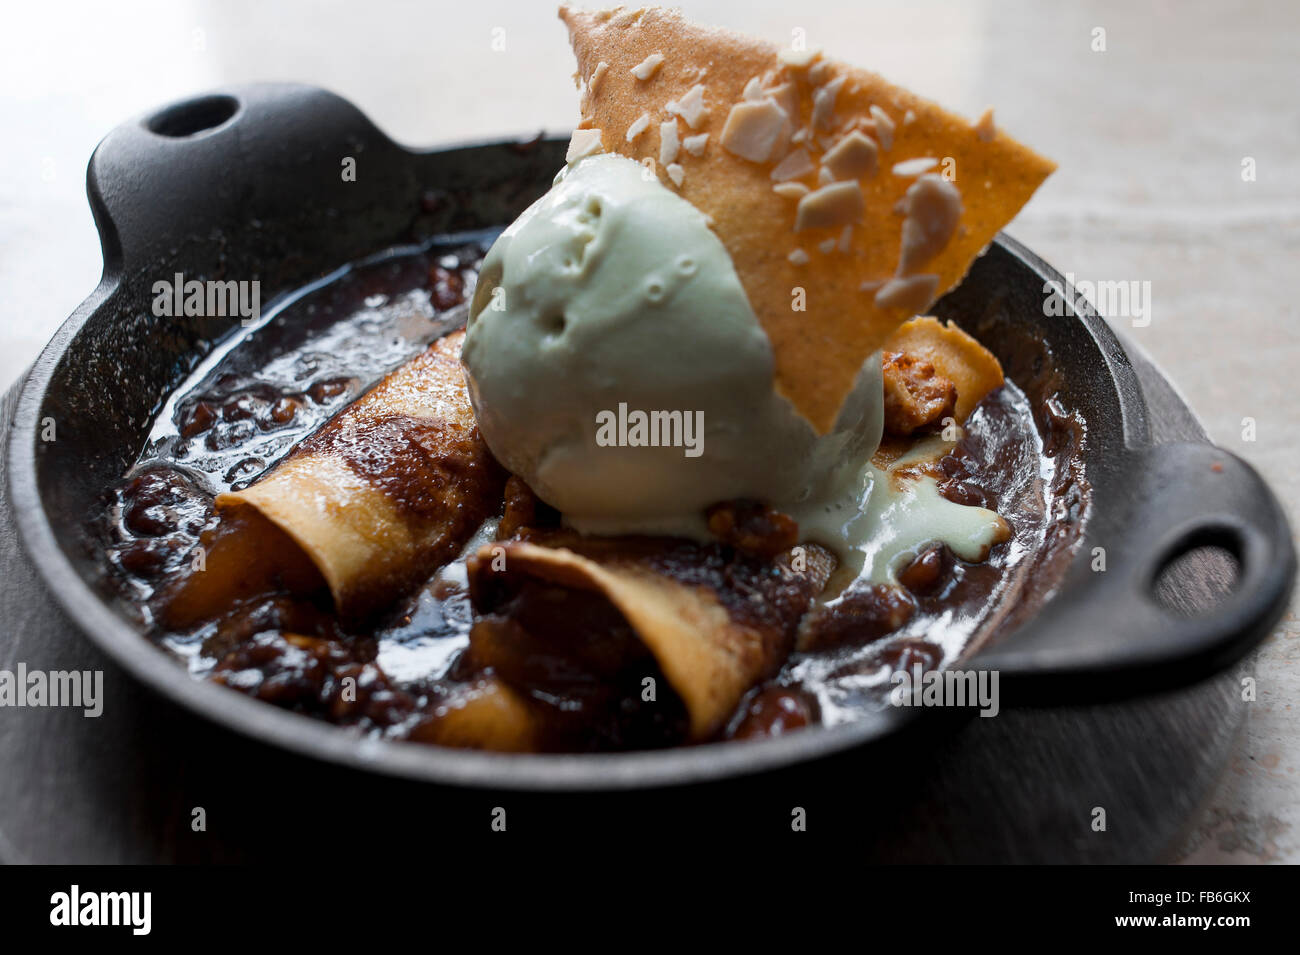 Mint ice cream, wafers and chocolate sauce presented in a black dish in an Italian restaurant. Stock Photo